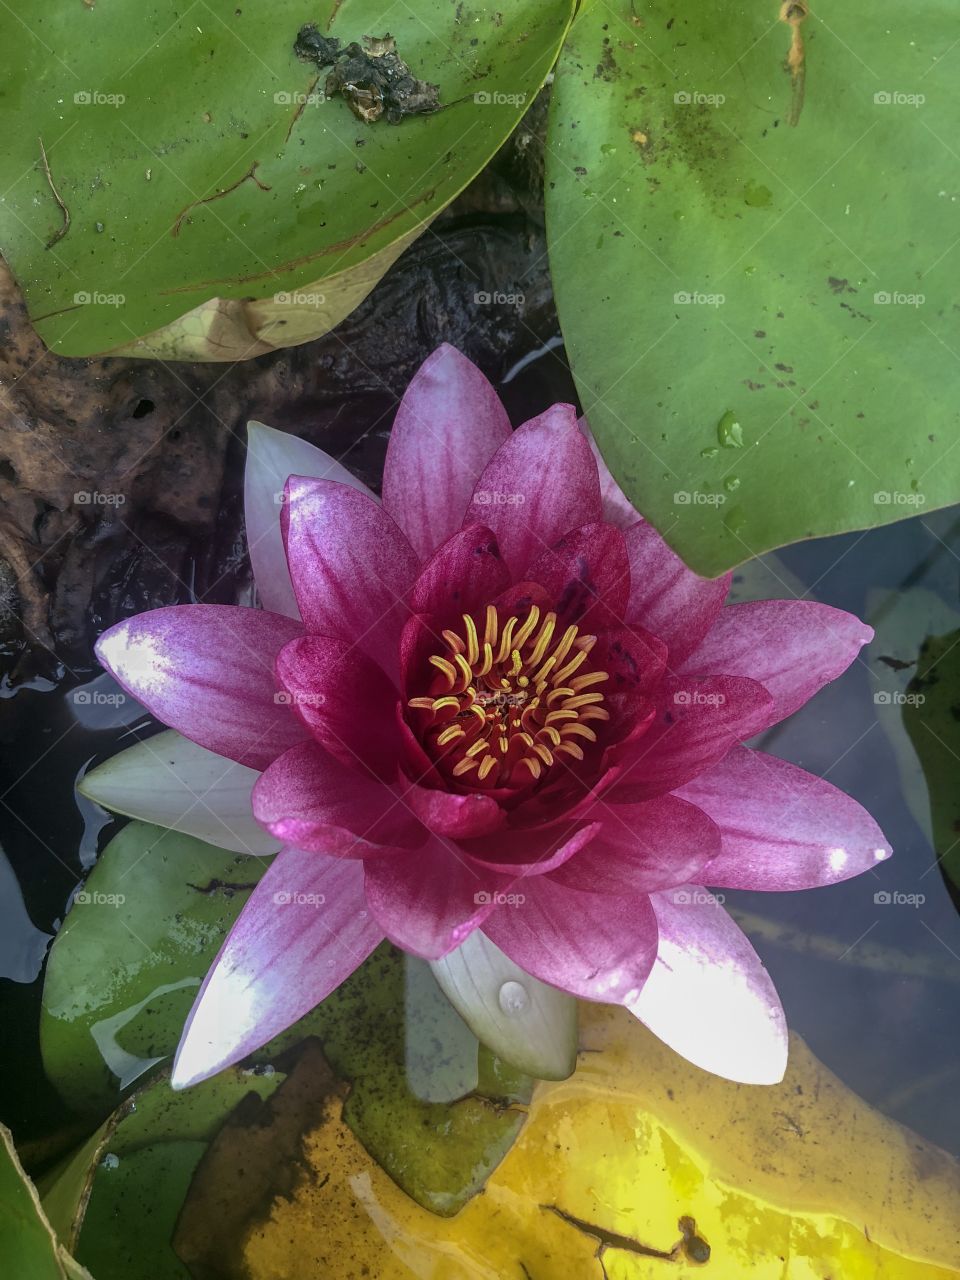 The Asian lotus flower is an aquatic plant belonging to the Nelumbonaceae family, native to Asia and Australia. 